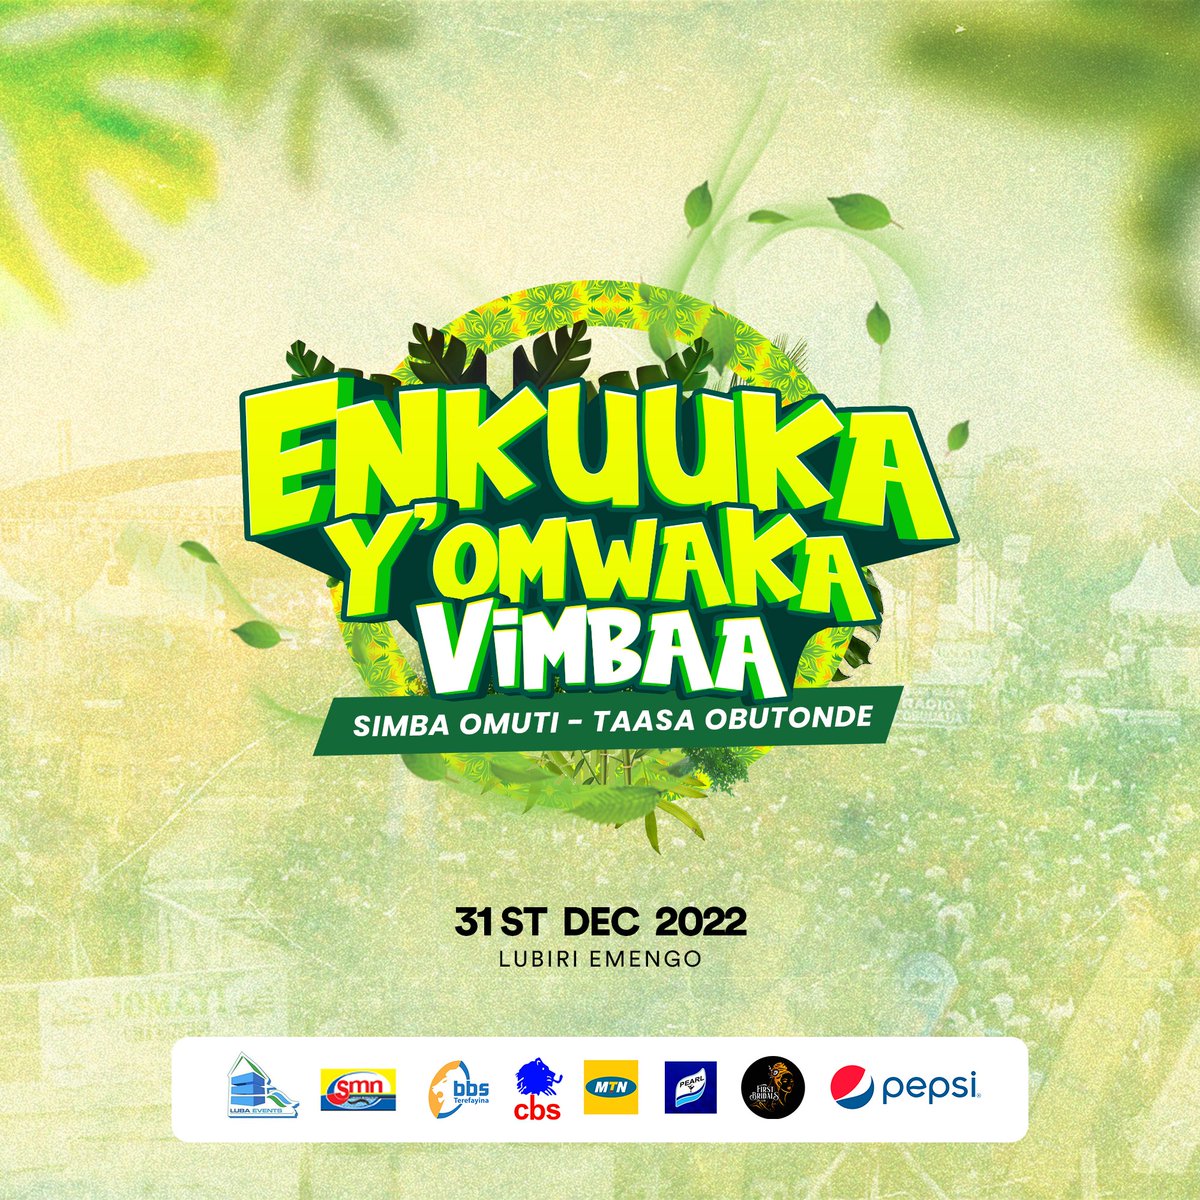 As we continue getting ready for the biggest end of year party on the 31st of December in Lubiri Mengo.
Let us save the environment by planting more trees.
As you do so, take a picture and share it on your different social media platforms.
#EnkuukaVimba #SimbaOmuti